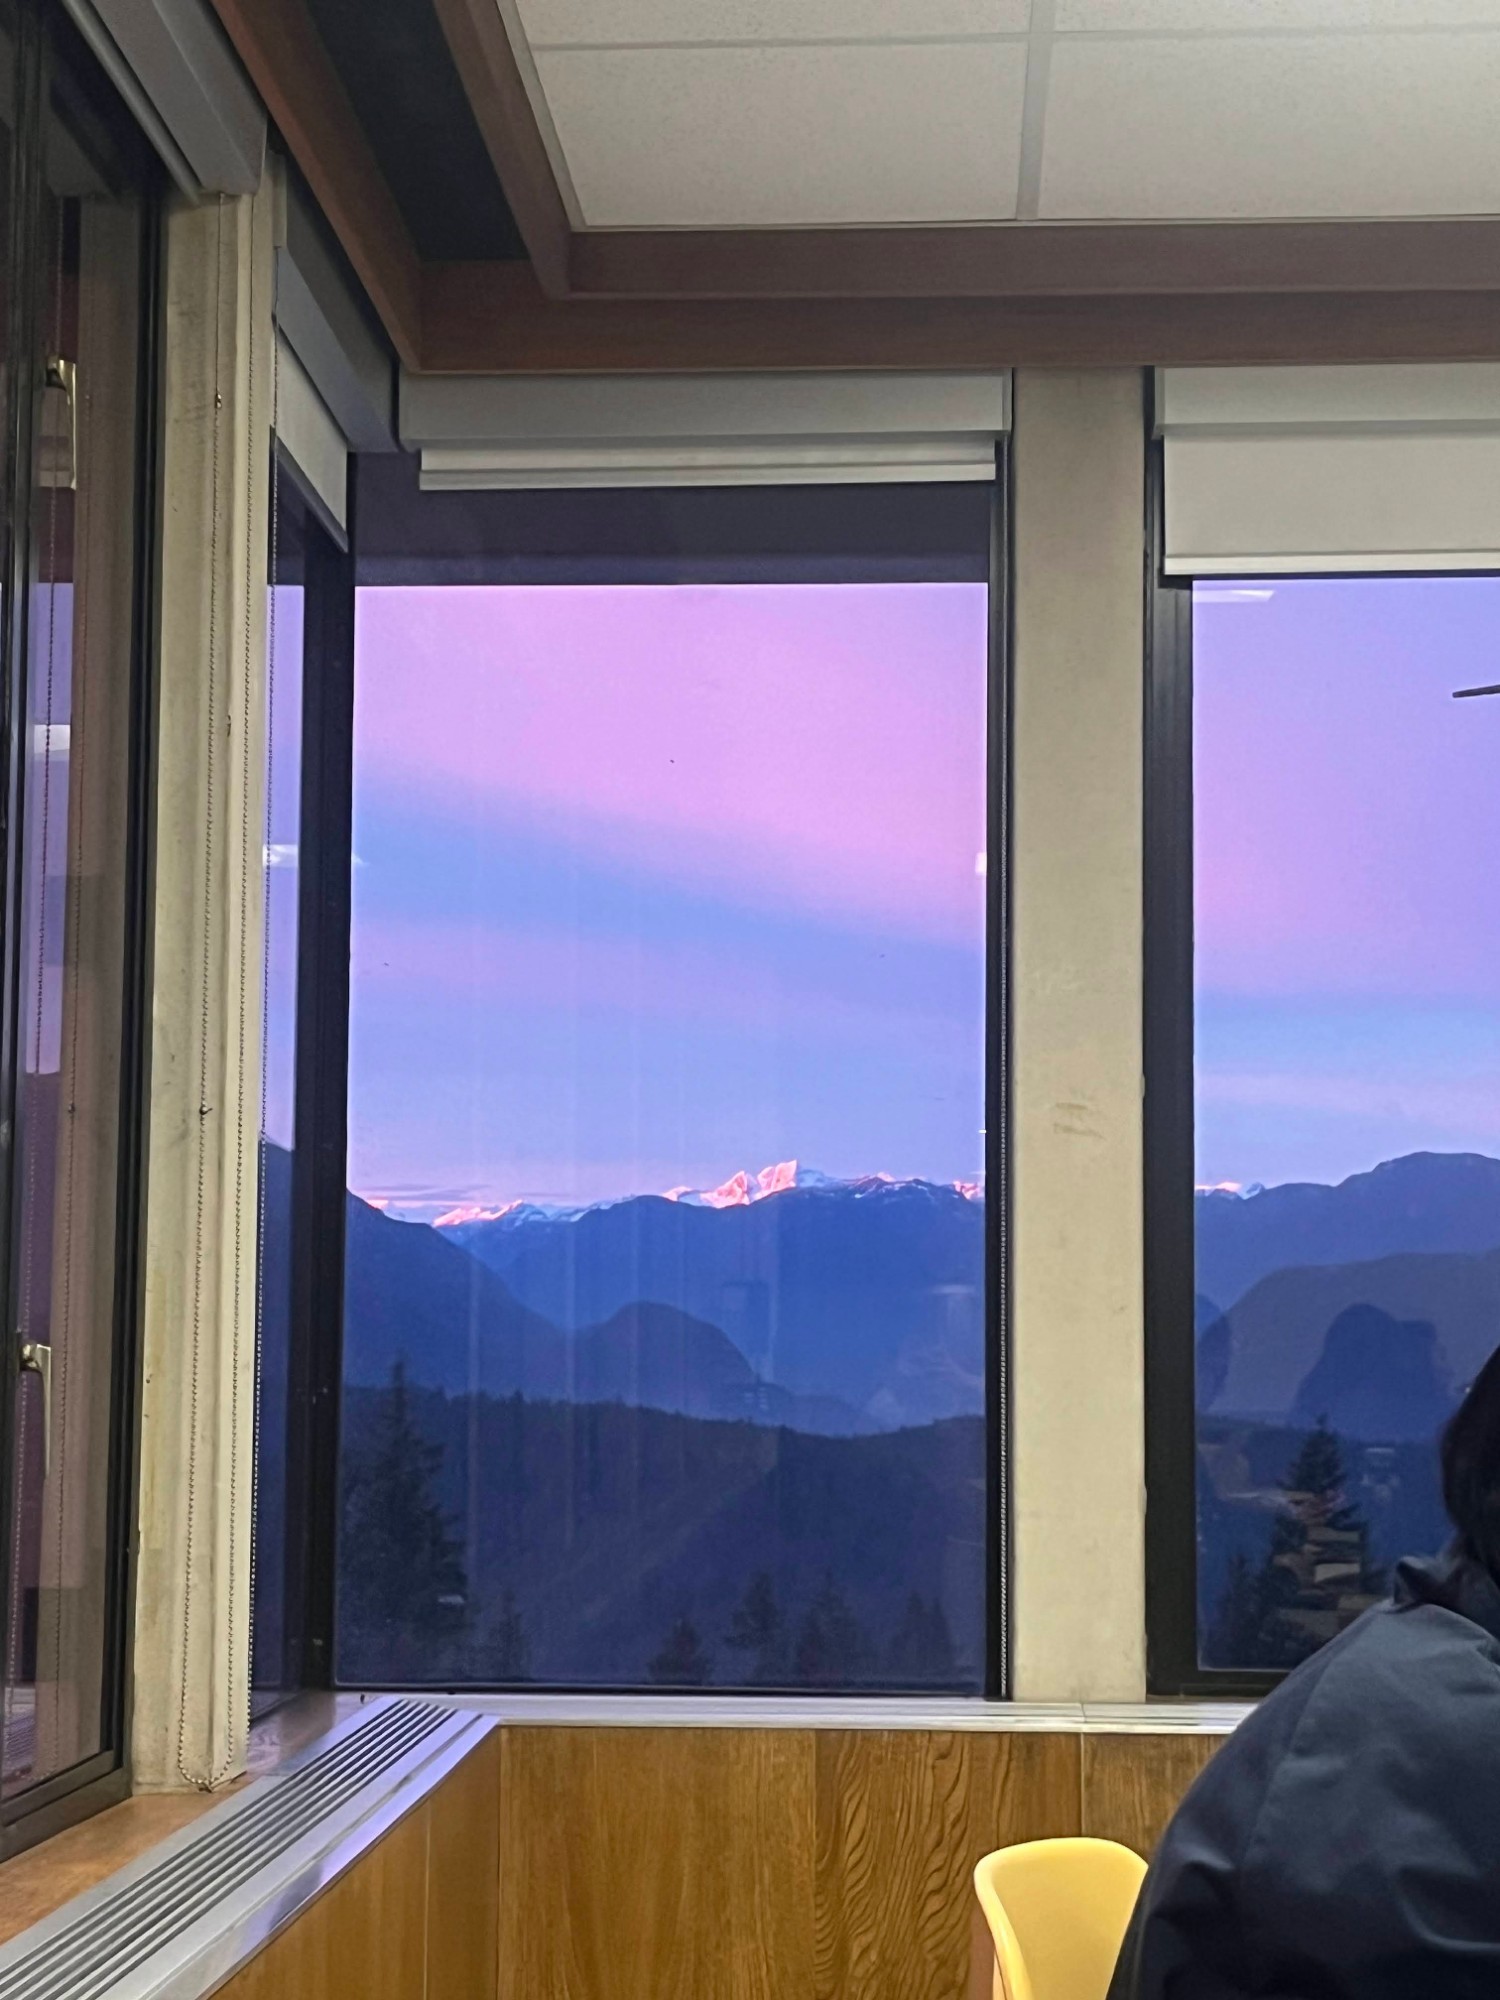 A window on SFU Burnaby campus overlooking a purple and blue evening sky, with the mountains in the far background and the back of a student seated in the foreground.